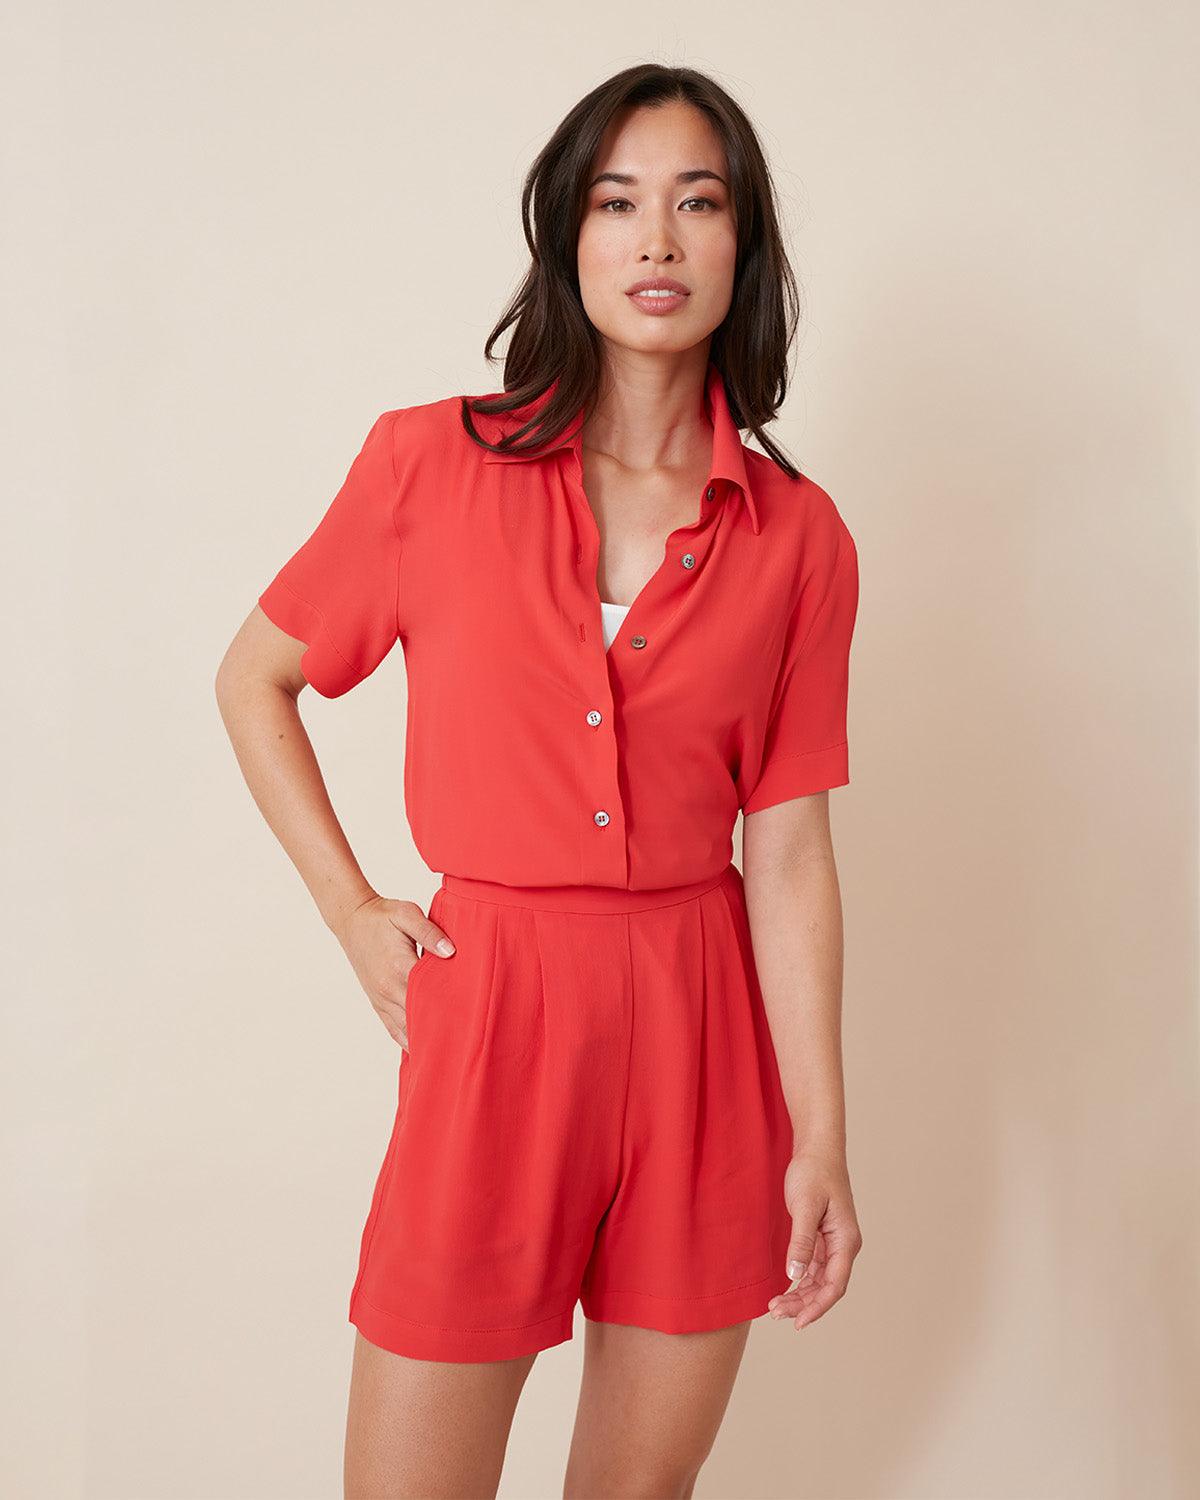 "#color_CHILI RED|Estyr is 5'9", wearing a size XS